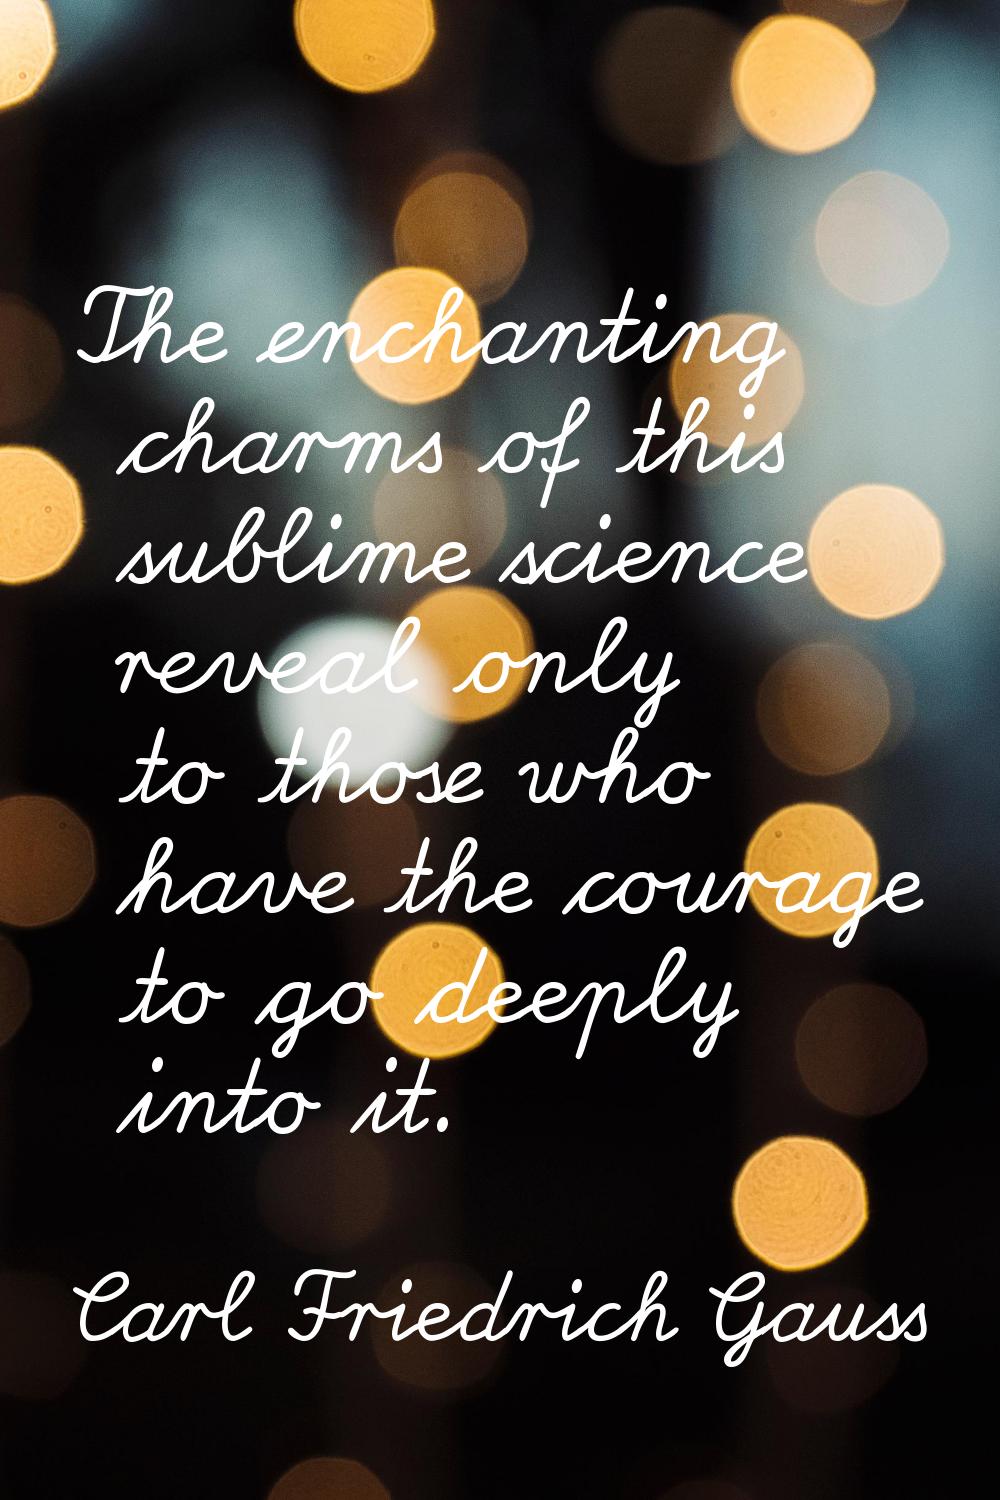 The enchanting charms of this sublime science reveal only to those who have the courage to go deepl